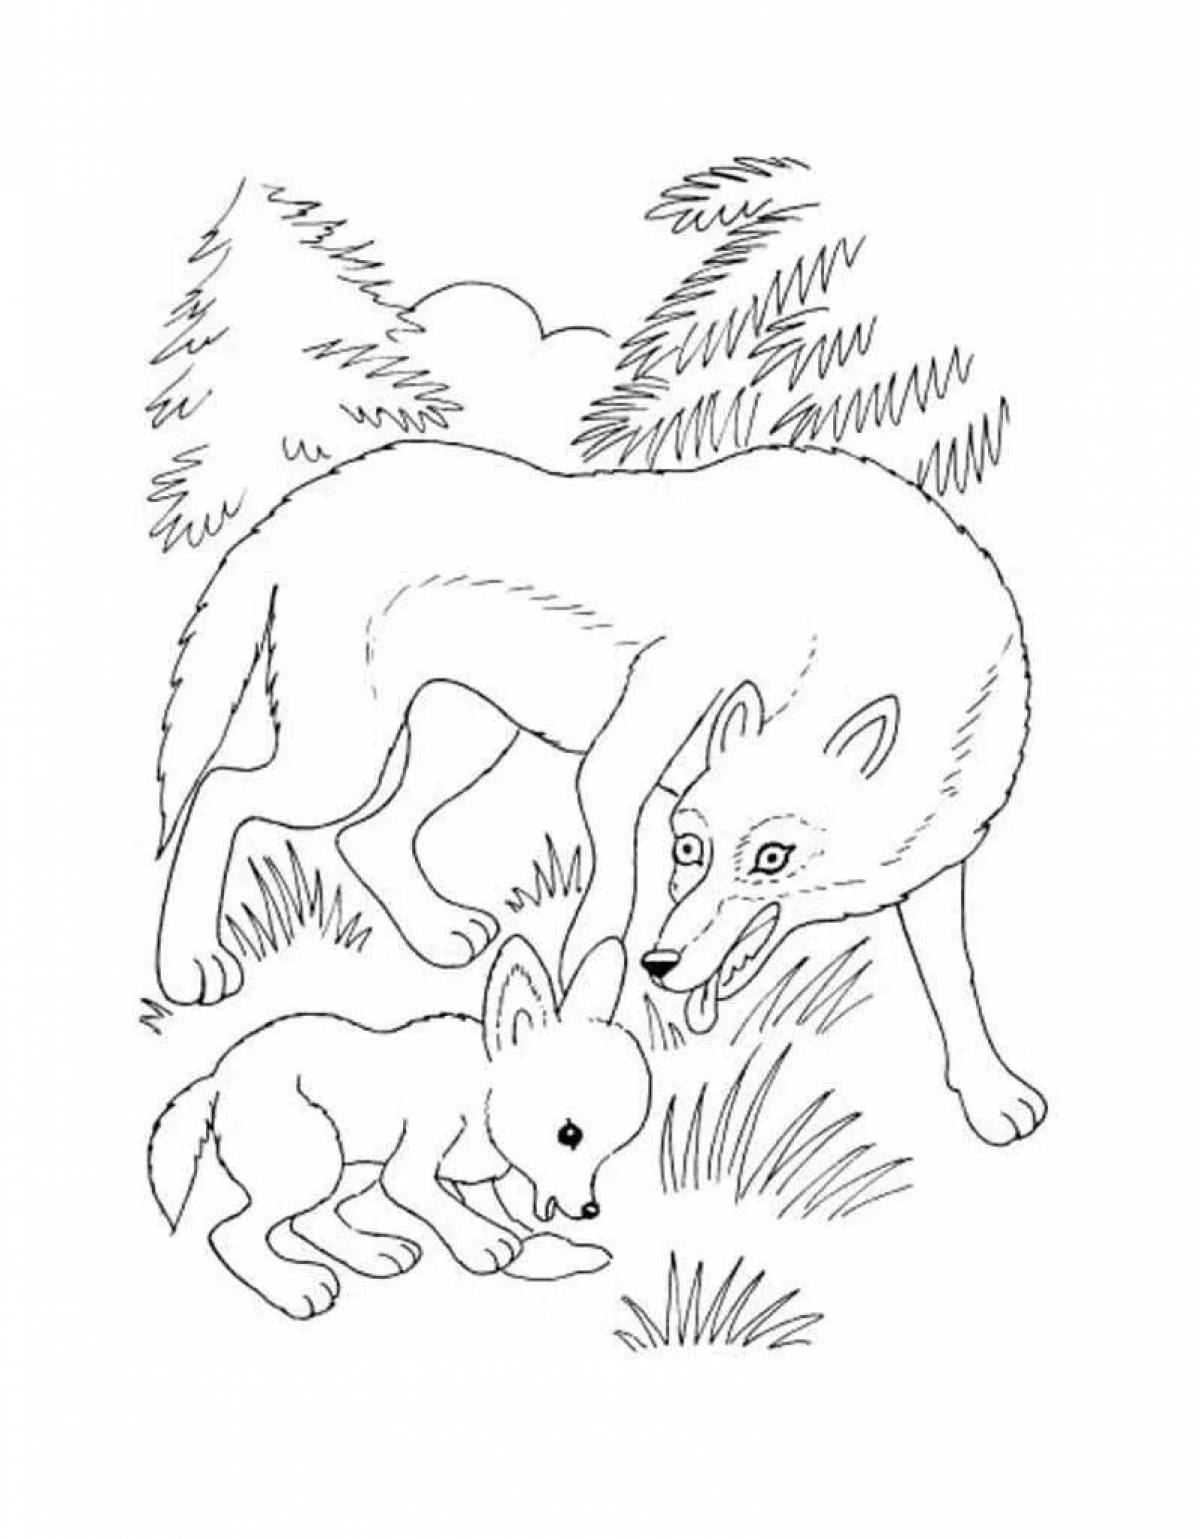 Adorable lamb and wolf coloring book